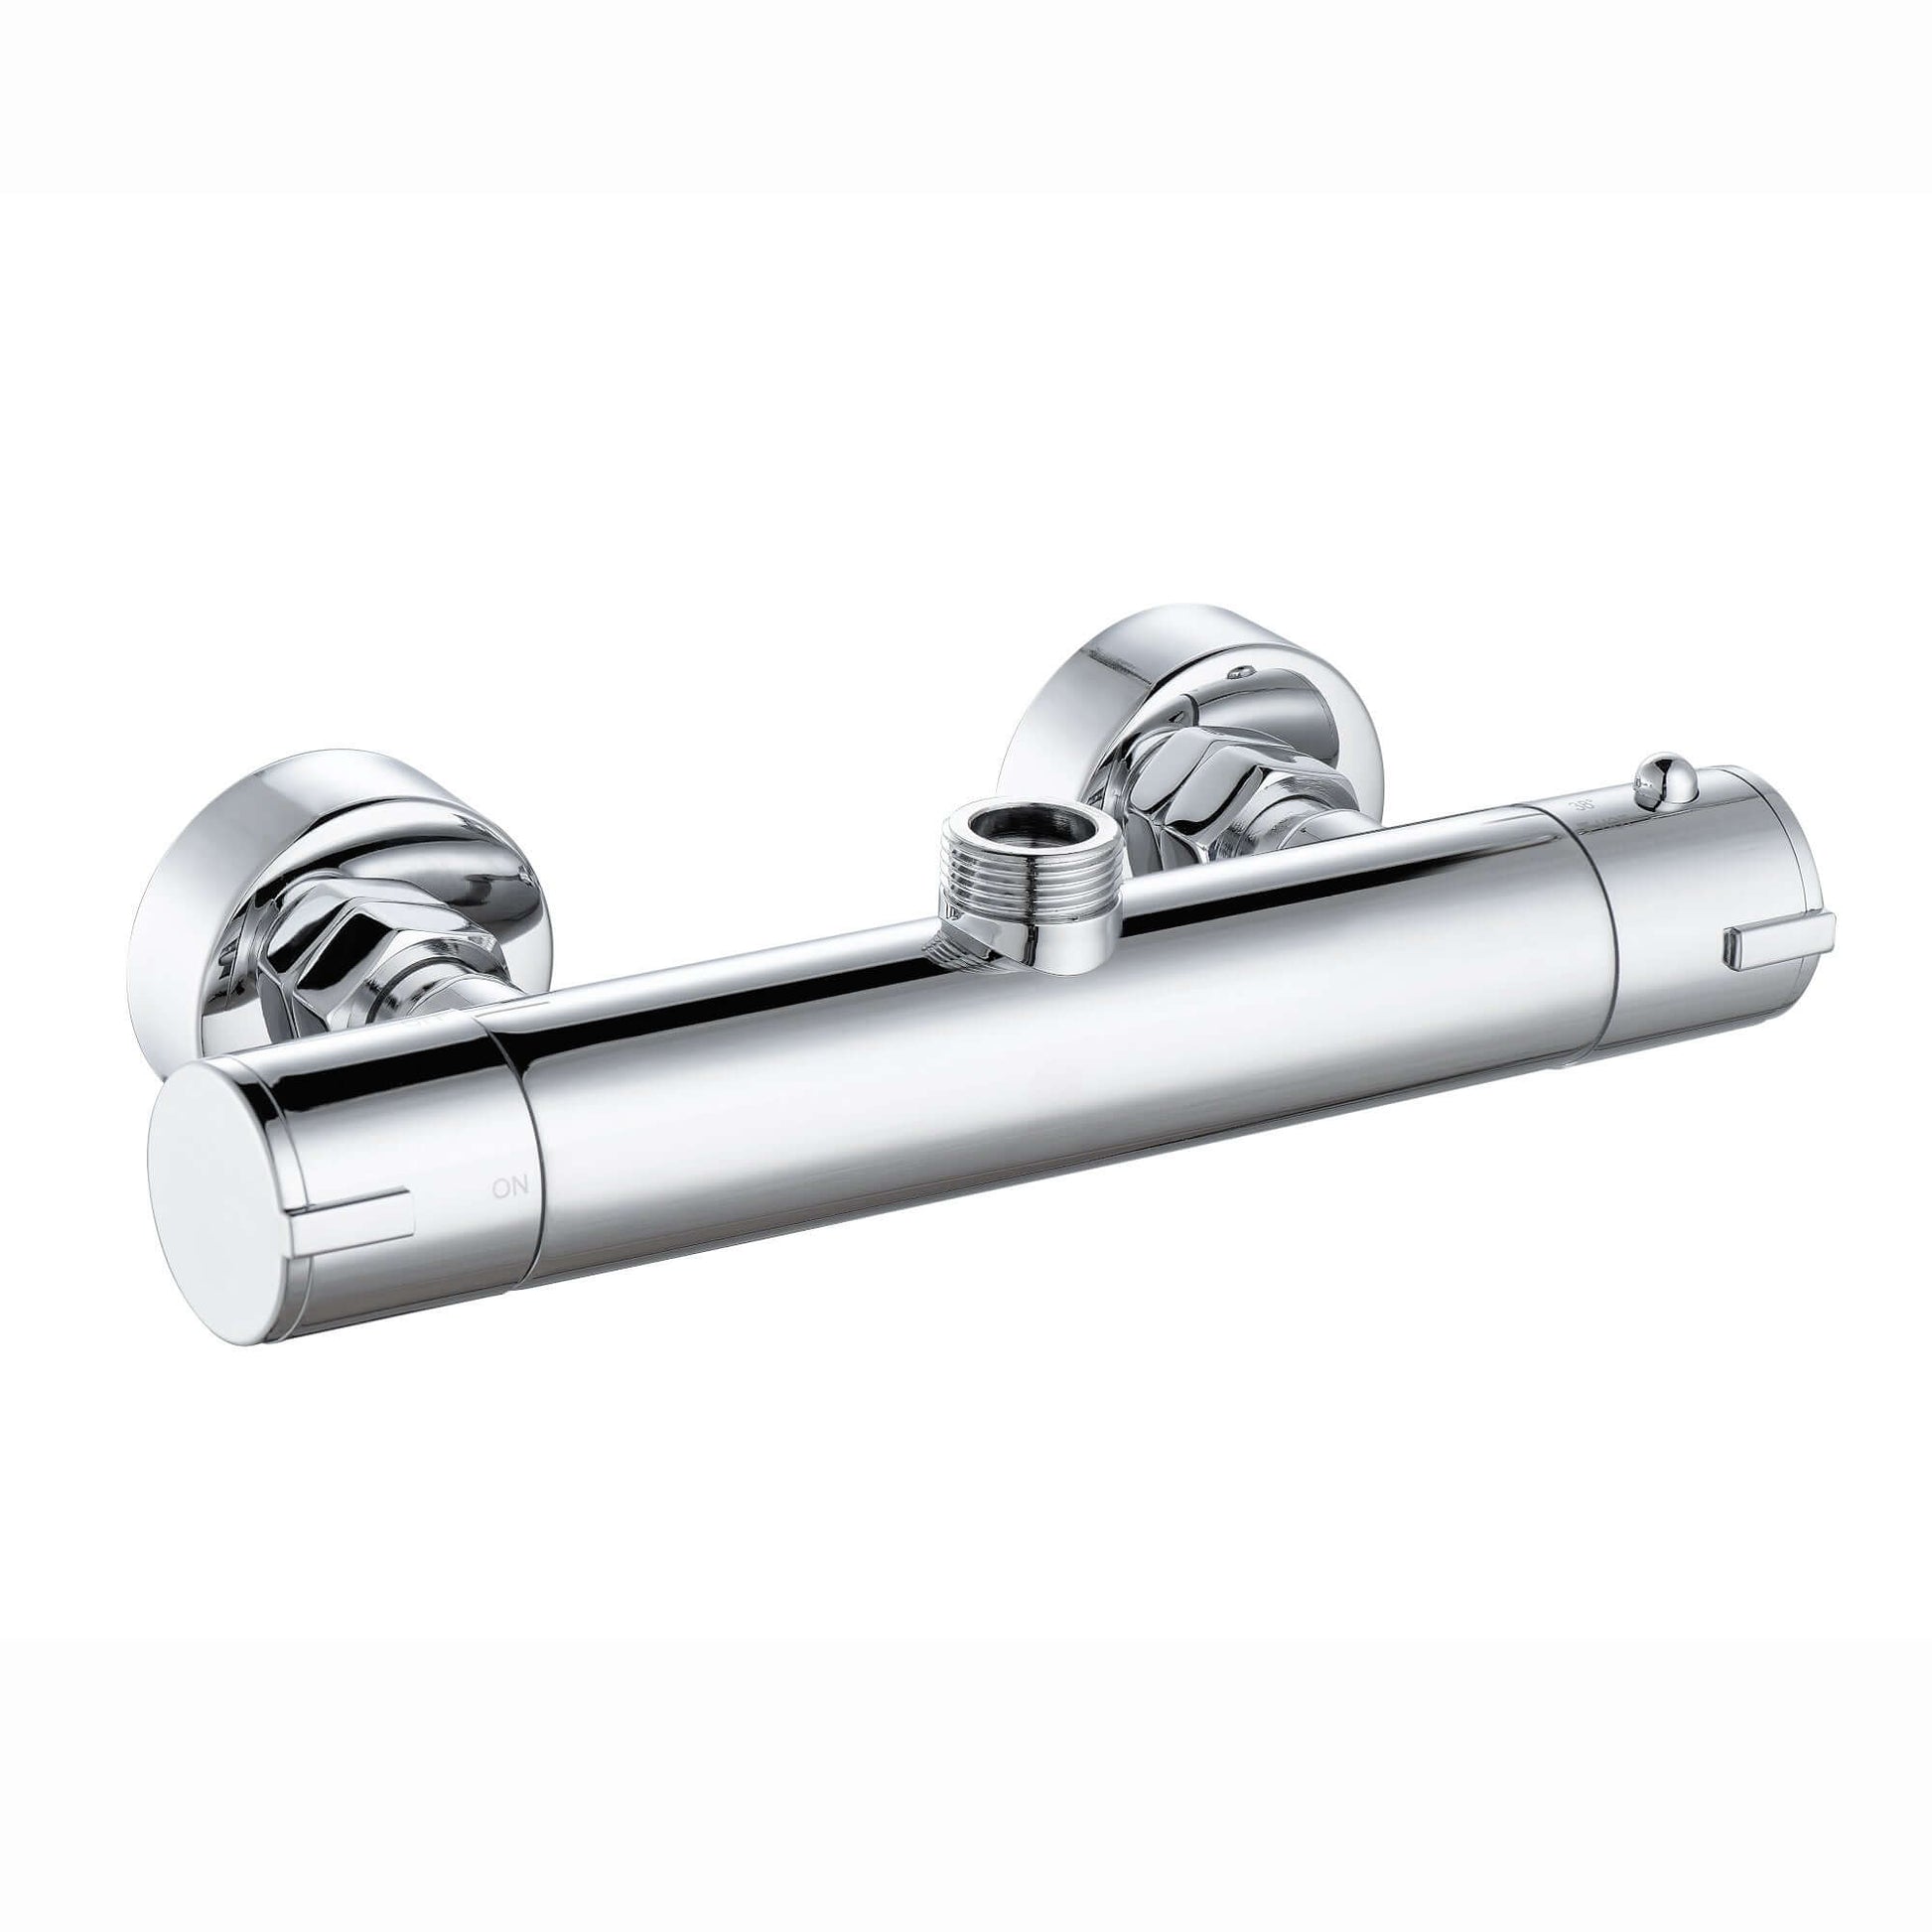 Opaque for ikke at nævne helikopter Dune thermostatic bar shower mixer valve top outlet 1/2" or 3/4" outlet  (with adaptor) contemporary - chrome at £57.99 only - Enki